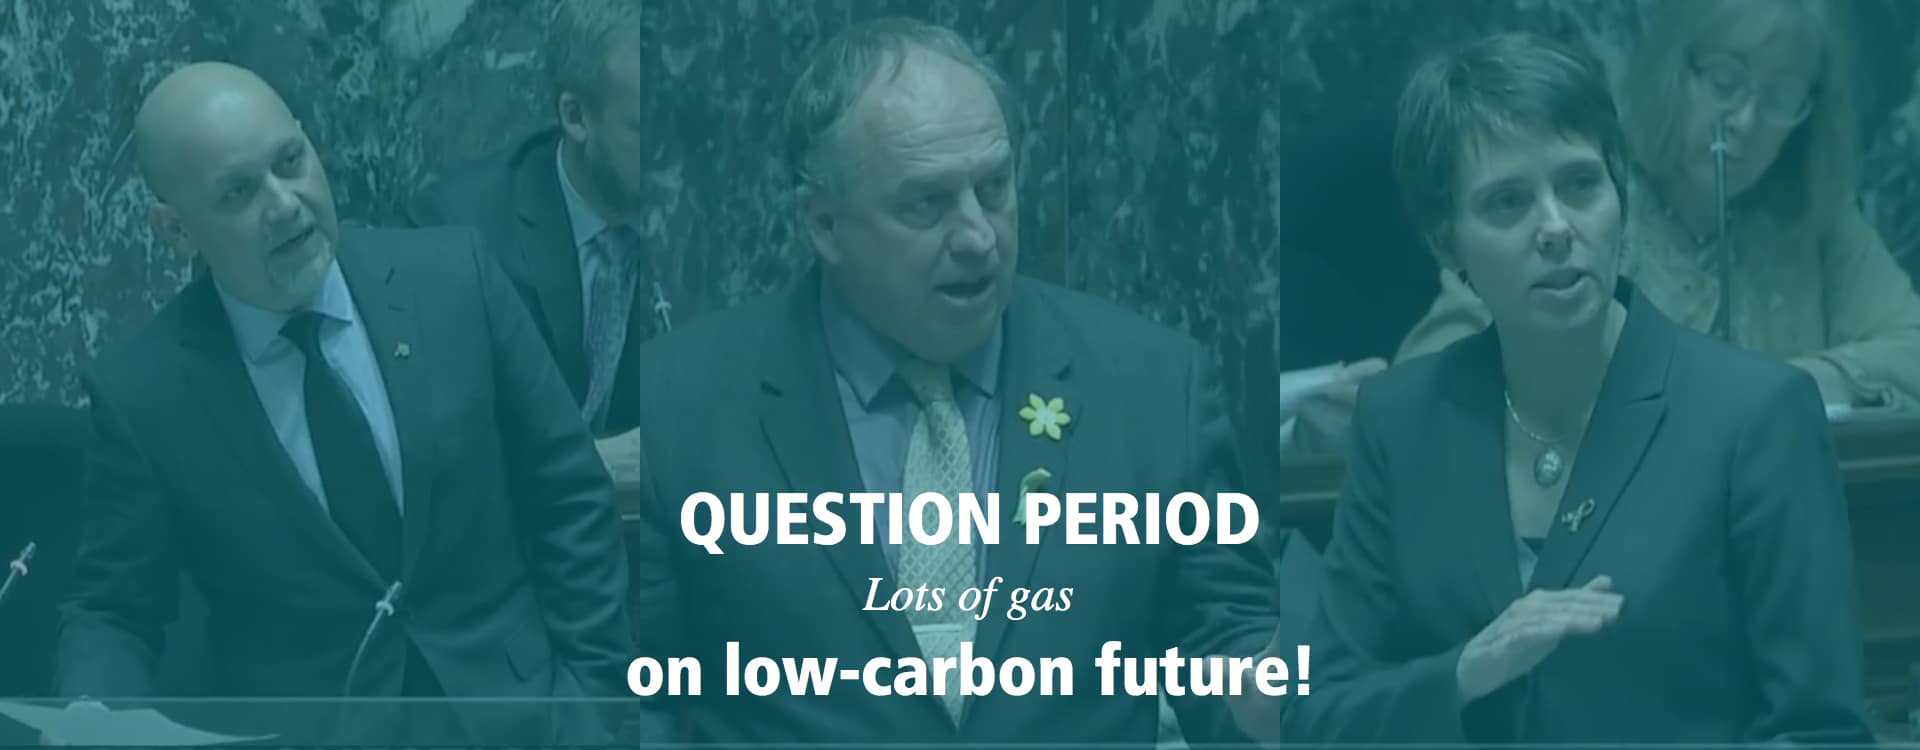 Lots of gas on low-carbon future!